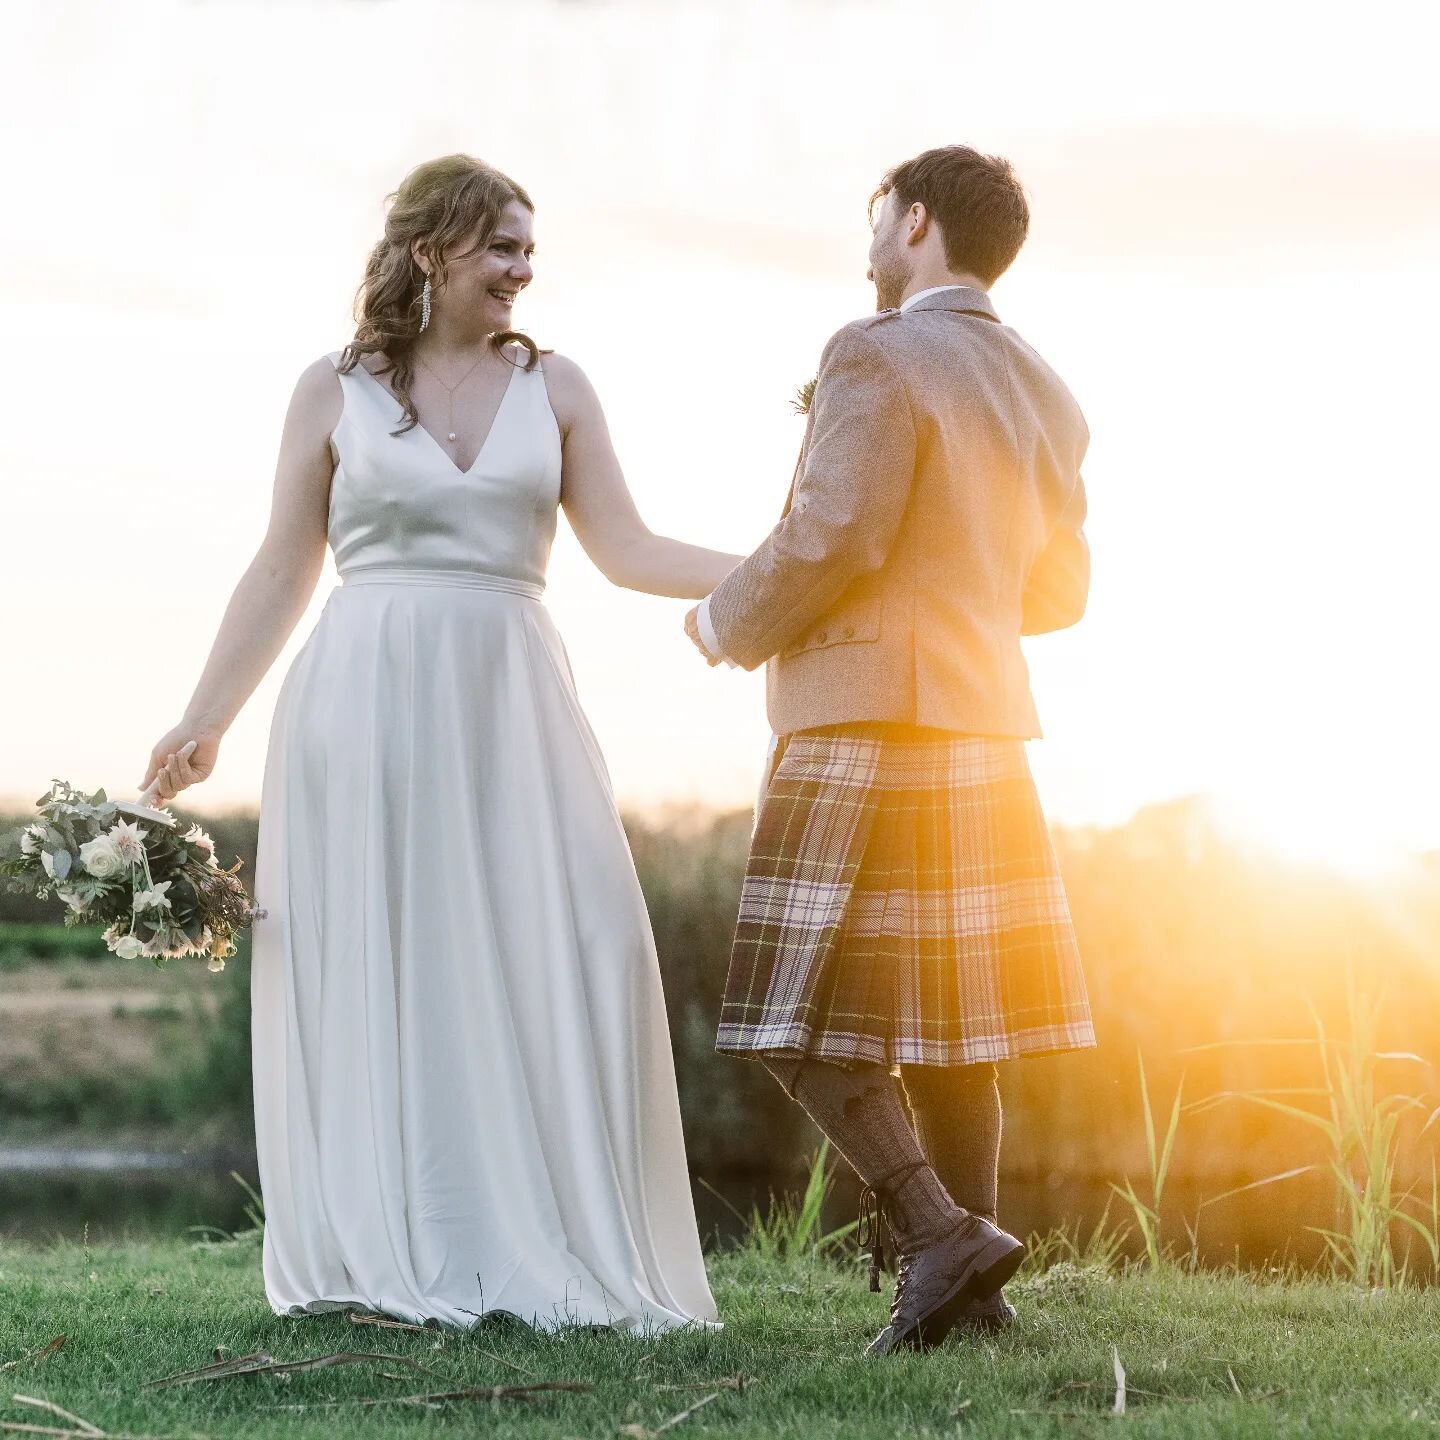 Day 4 of the #adventweddingchallenge Dance, Dance, Dance!

Dancing with your love in the golden sunset, does it get any better?

#weddingphotography #stamfordweddingphotographer #ukweddingvenue #ukweddingphotographer #bridetobe2023 #bride2023